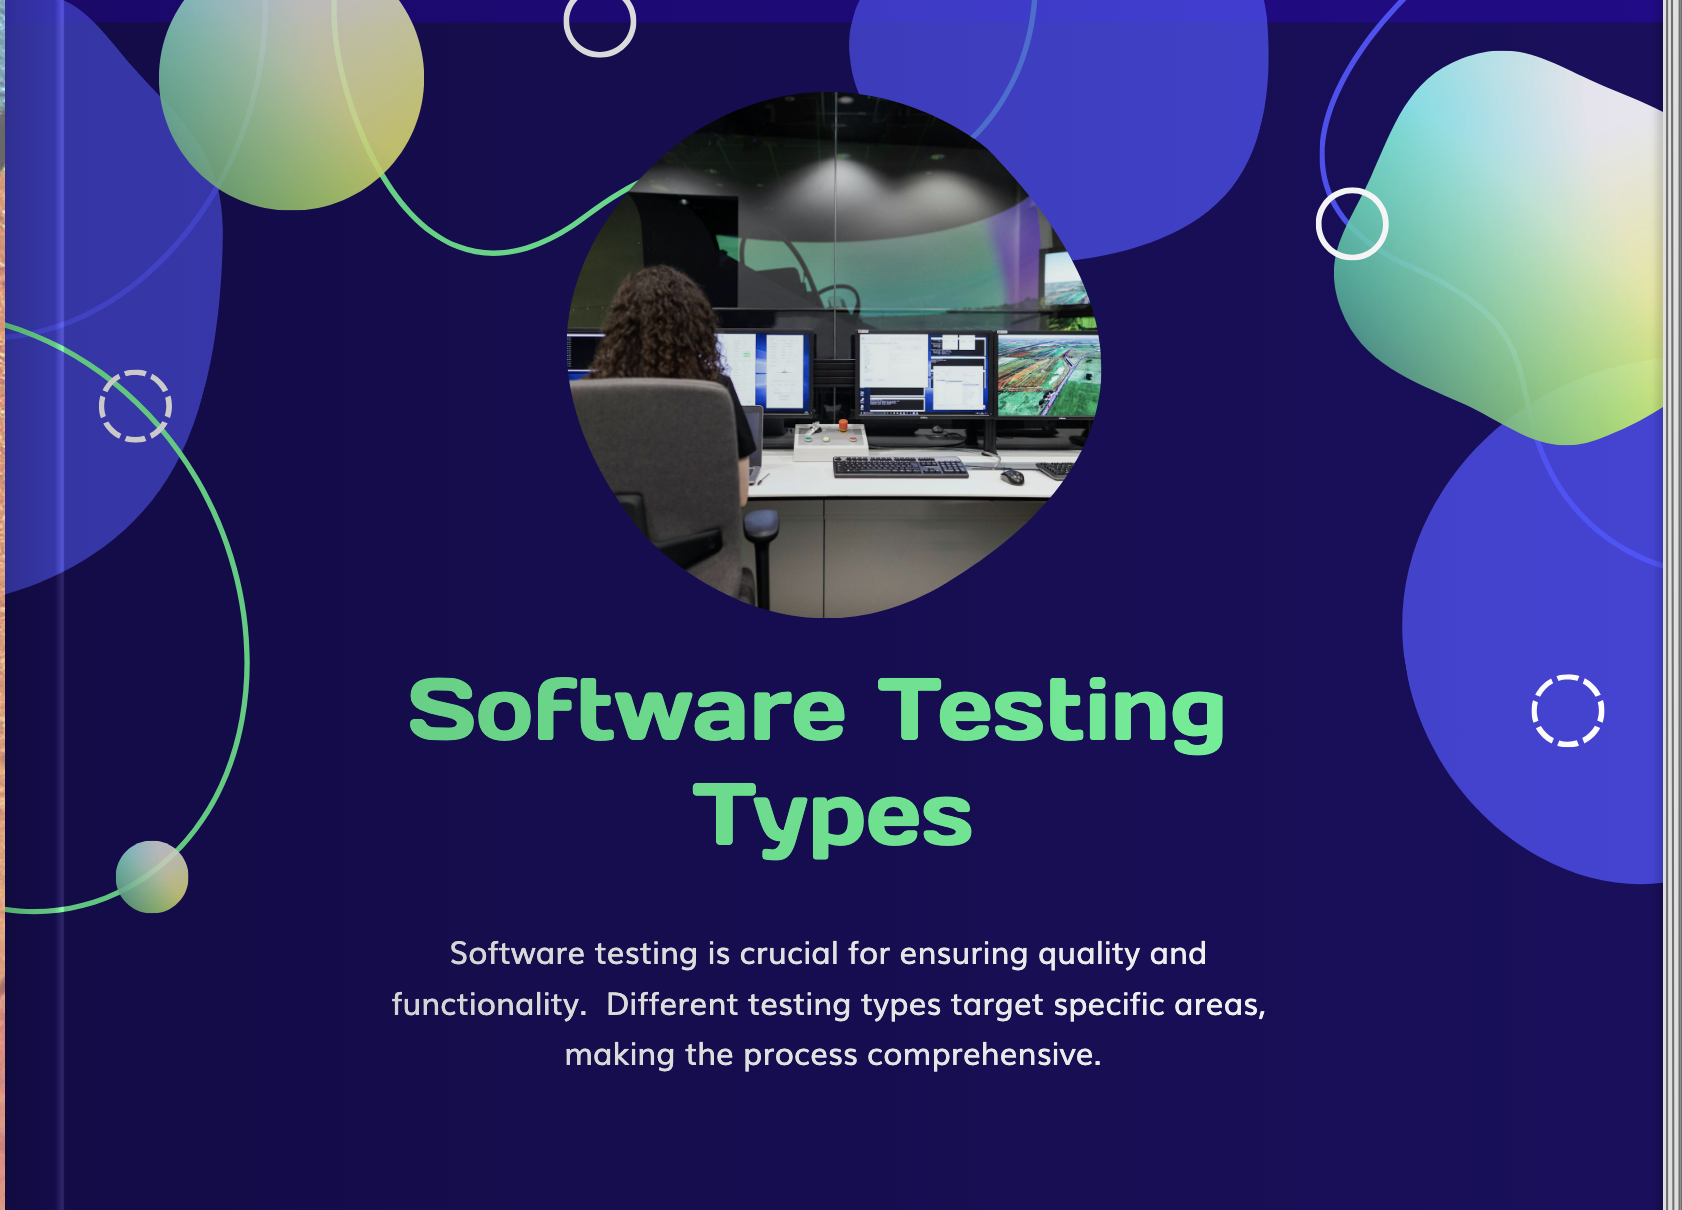 Infographic-Software Testing Types